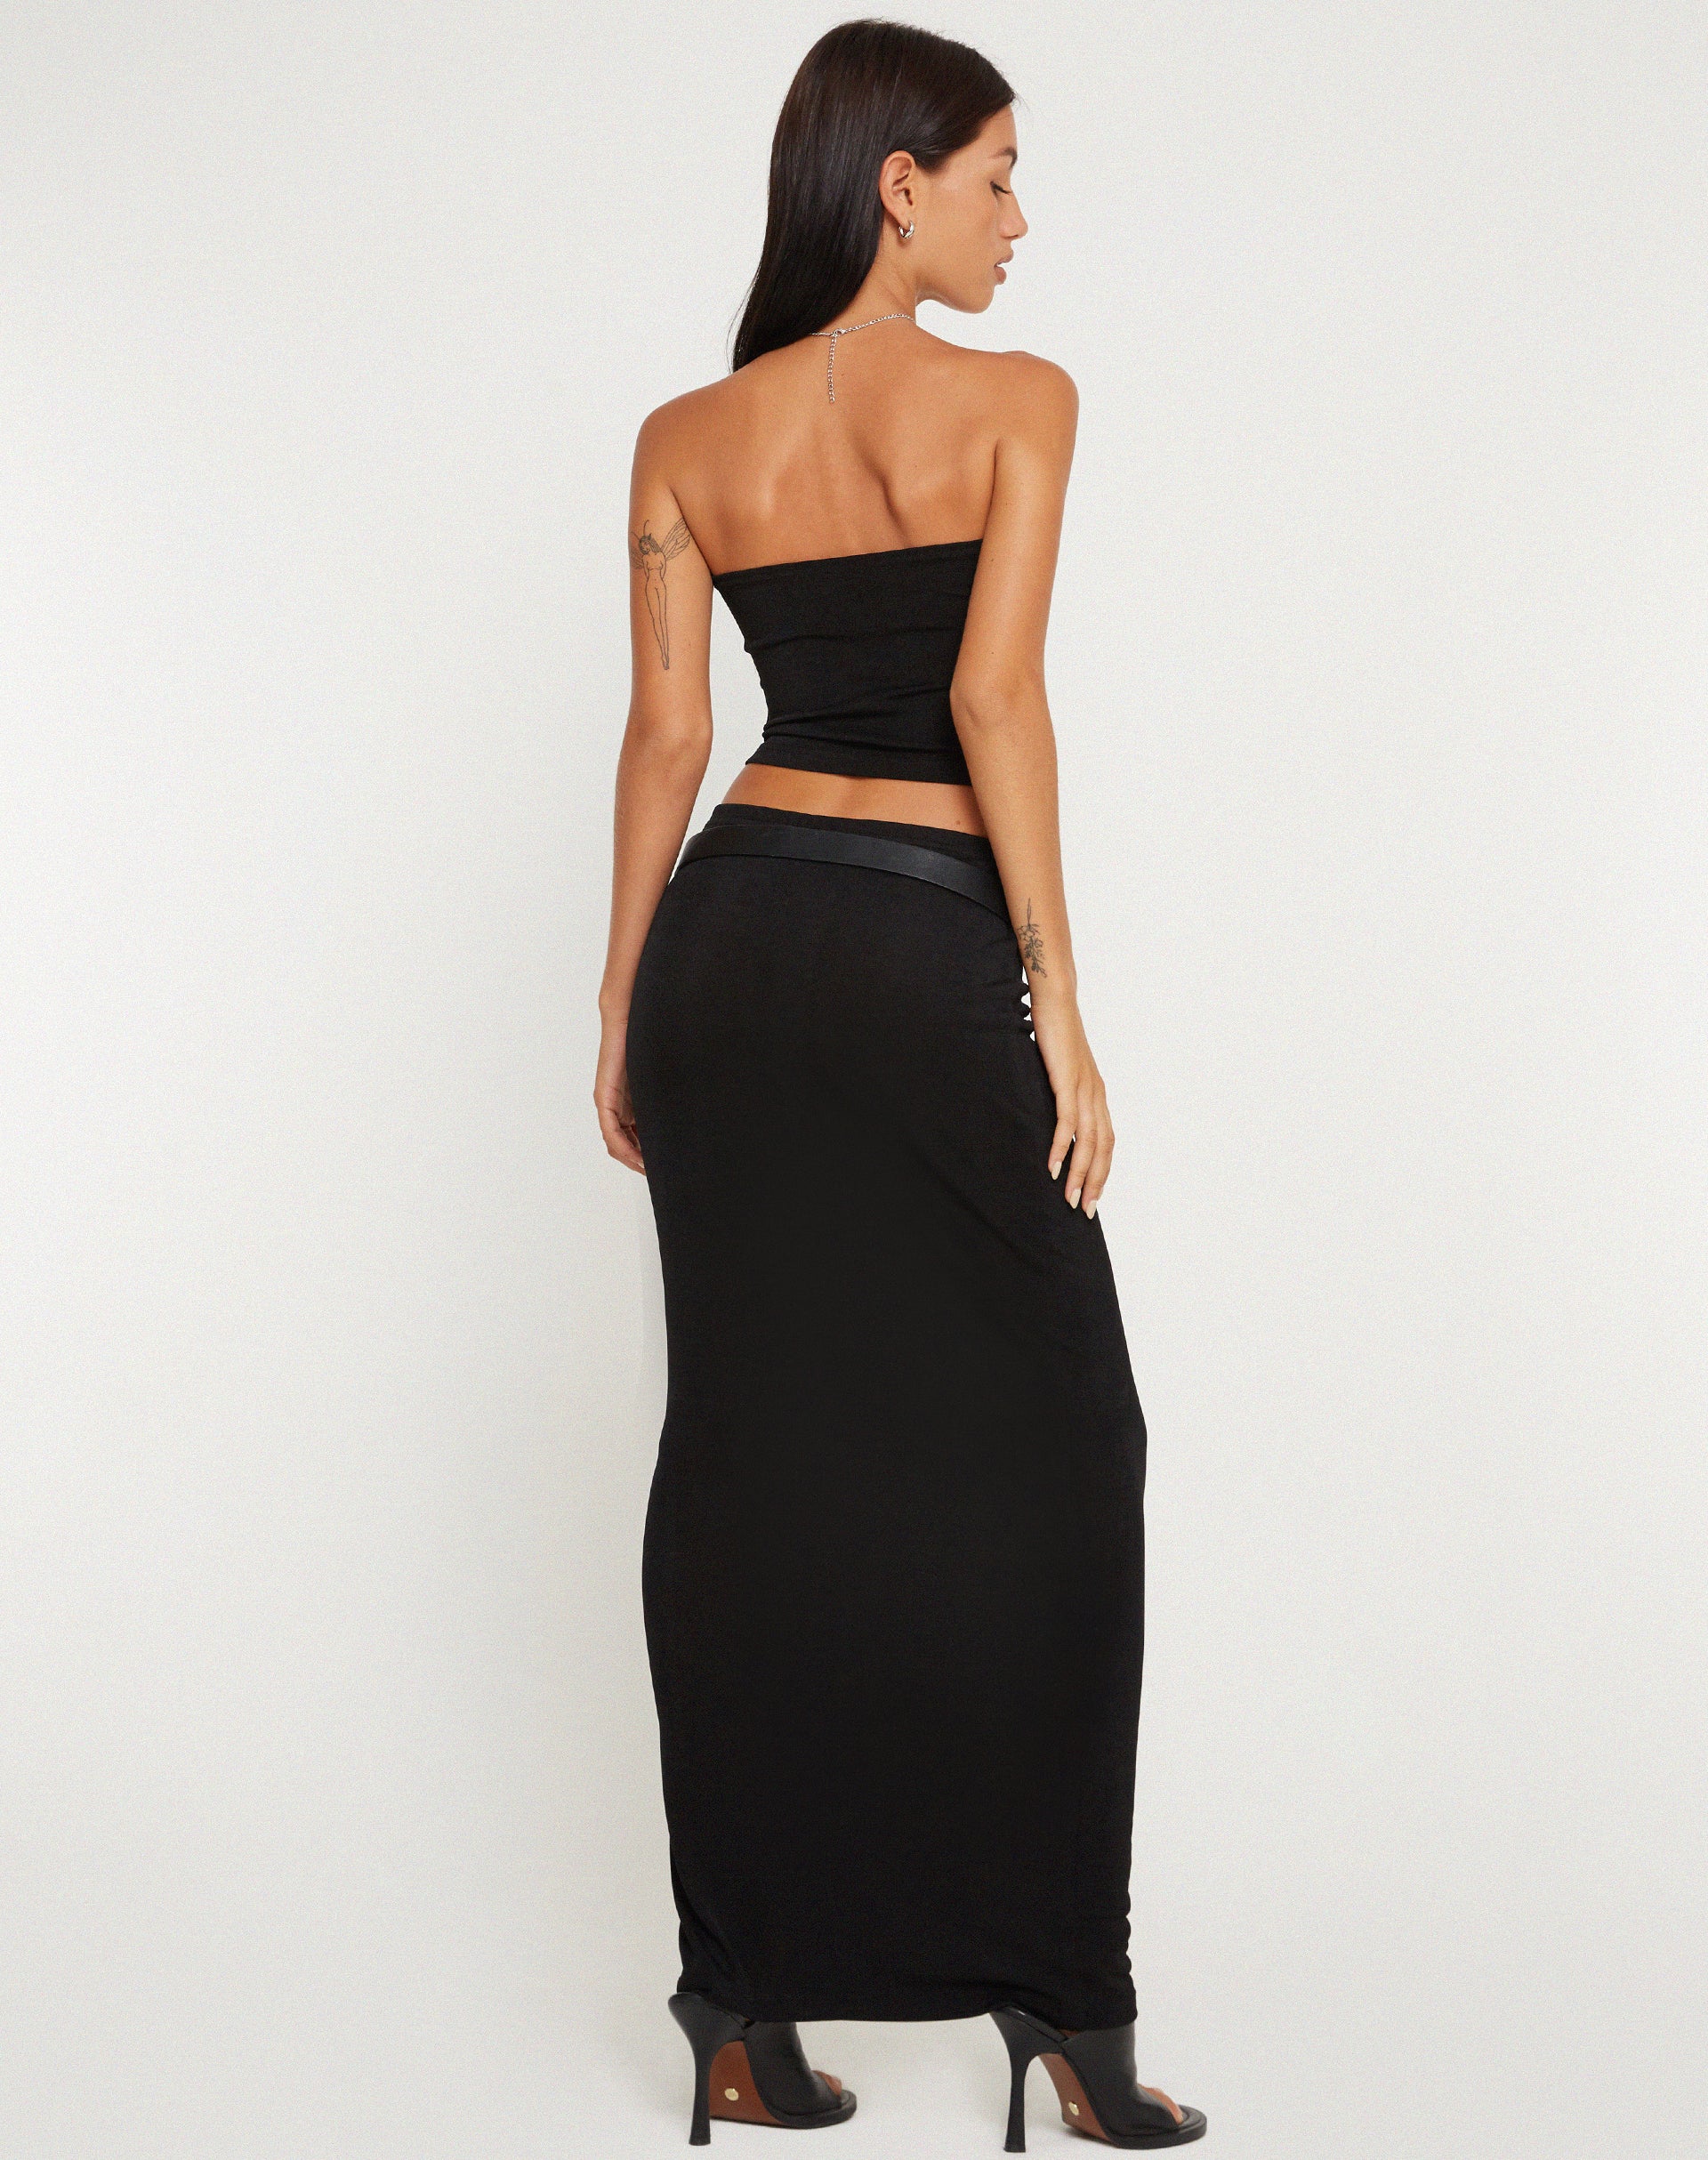 image of Tulus Low Rise Maxi Skirt in Black